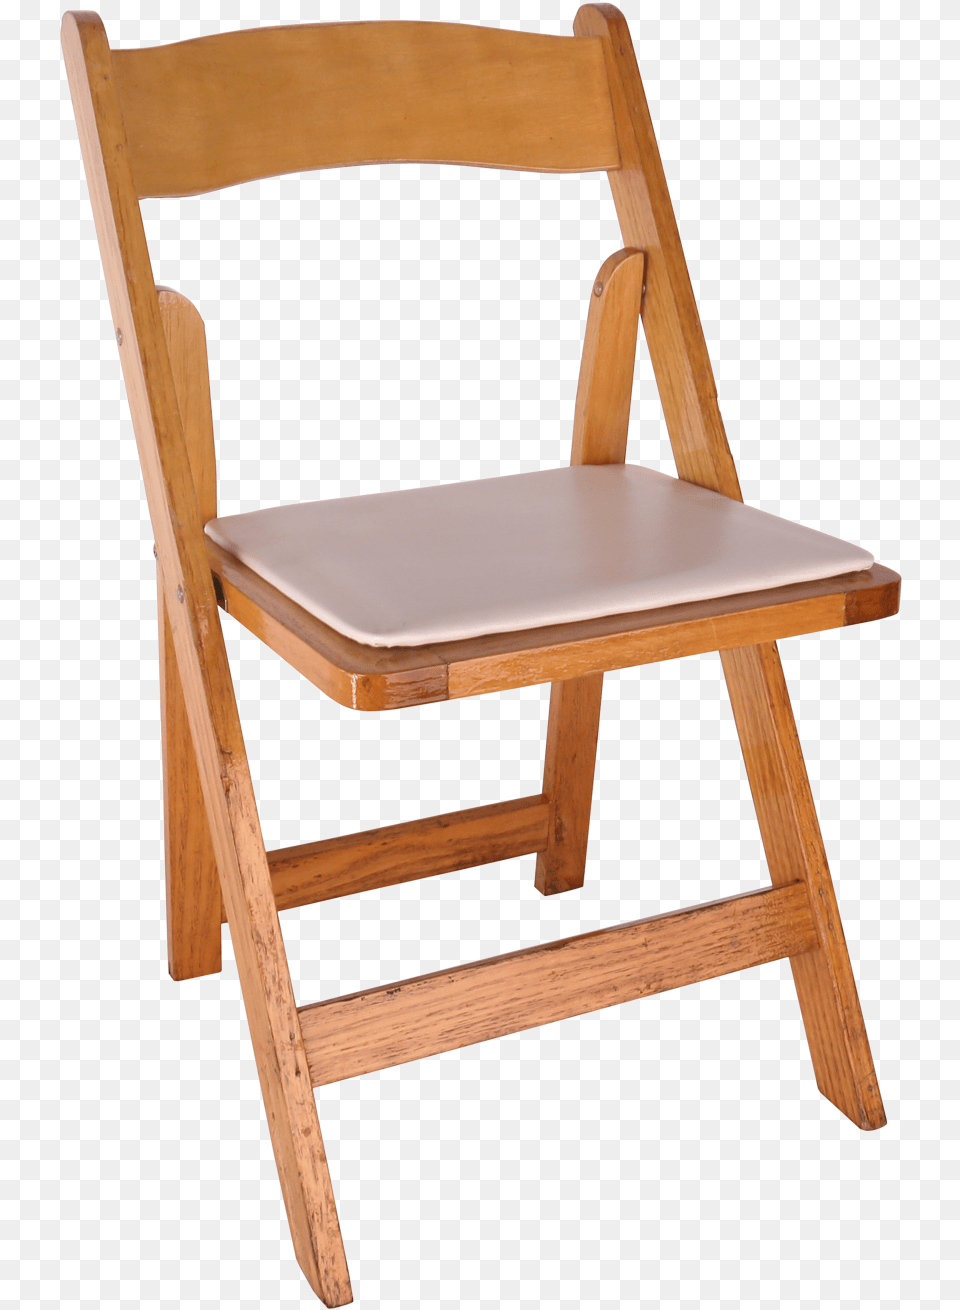 Chair Natural Oak Wood Folding Chair With Padded Seat Wooden Chair Folding Chair, Furniture, Plywood, Canvas Png